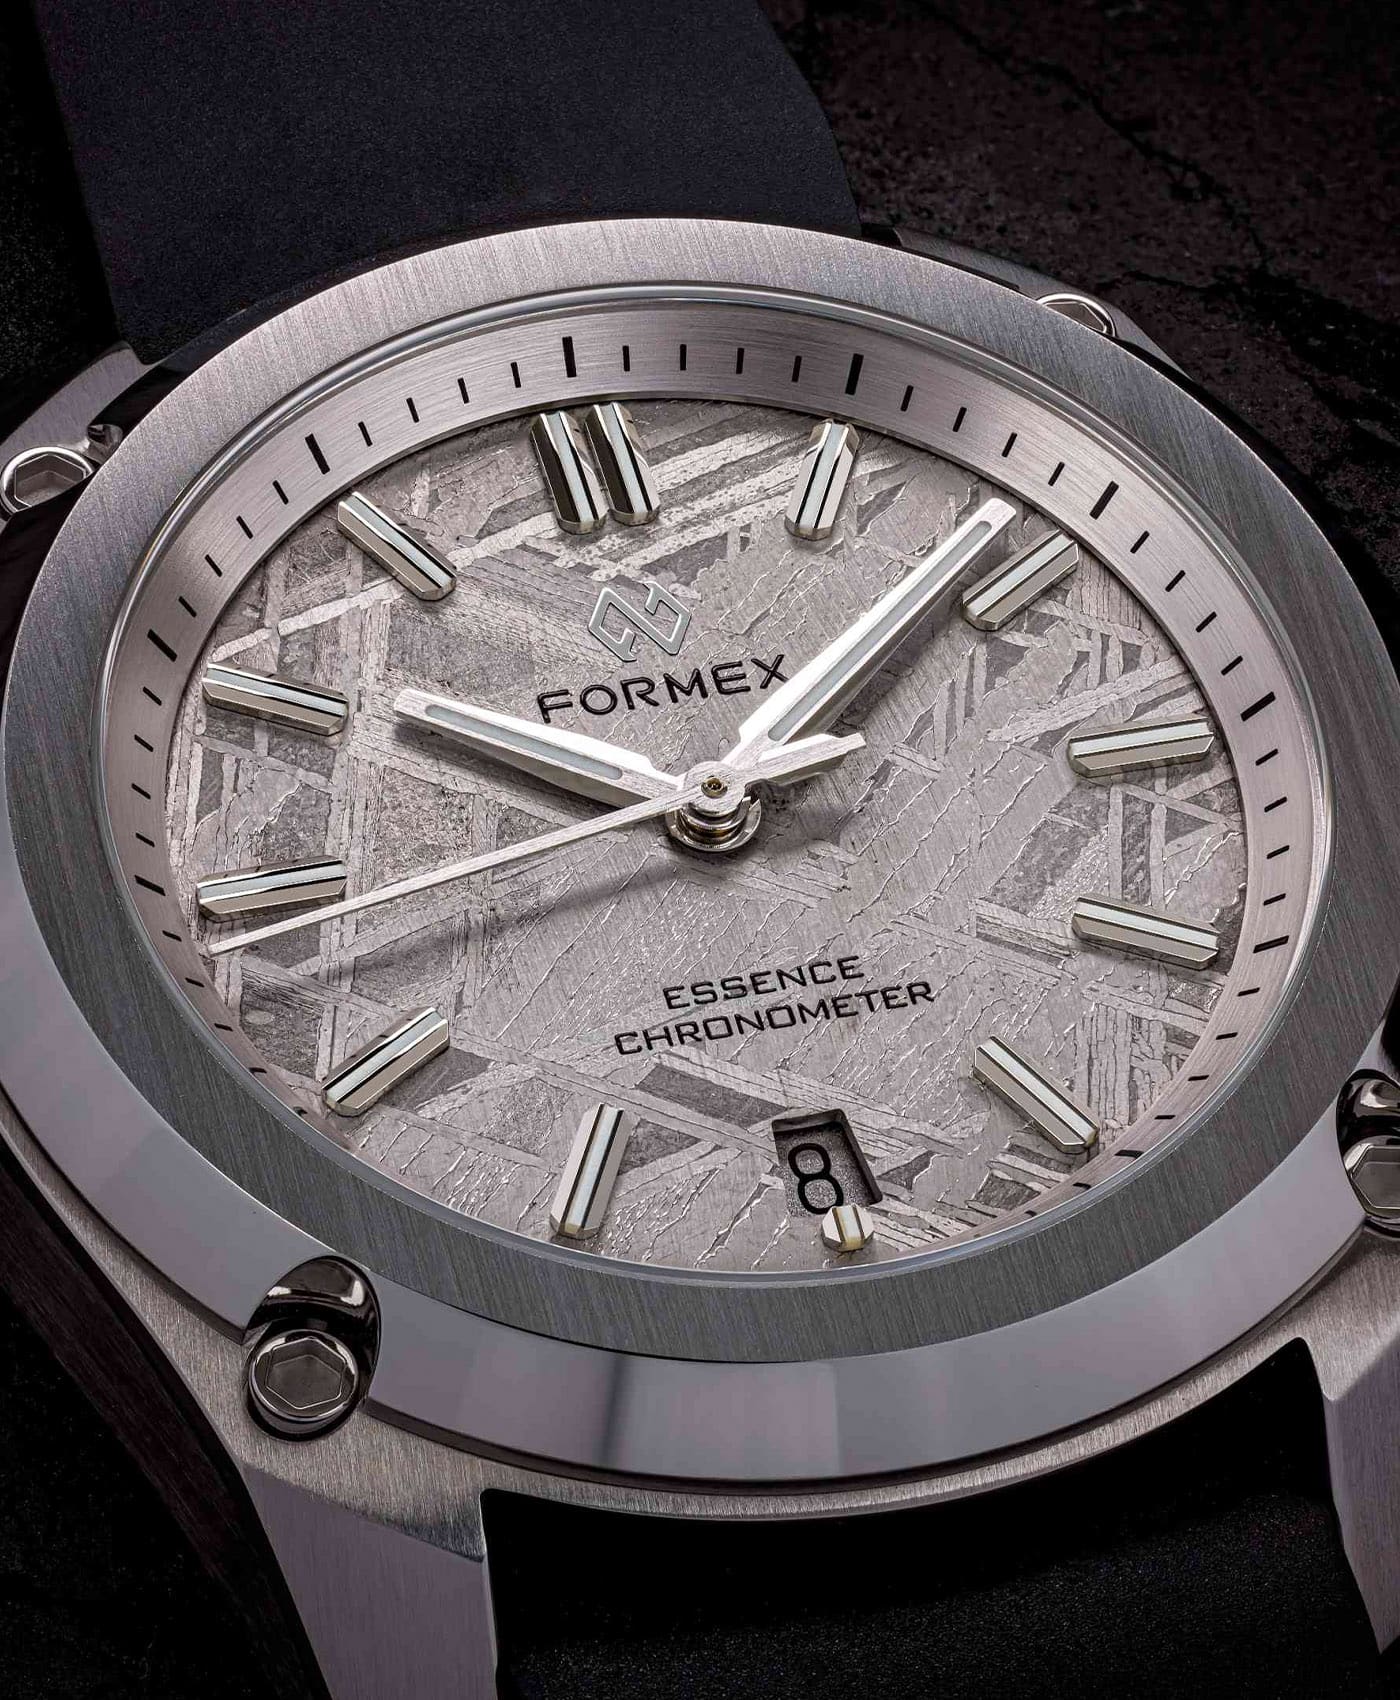 Formex - Essence ThirtyNine (39mm) Automatic Chronometer - SPACE ROCK - Limited Edition - Steel Bracelet-dial macro-min